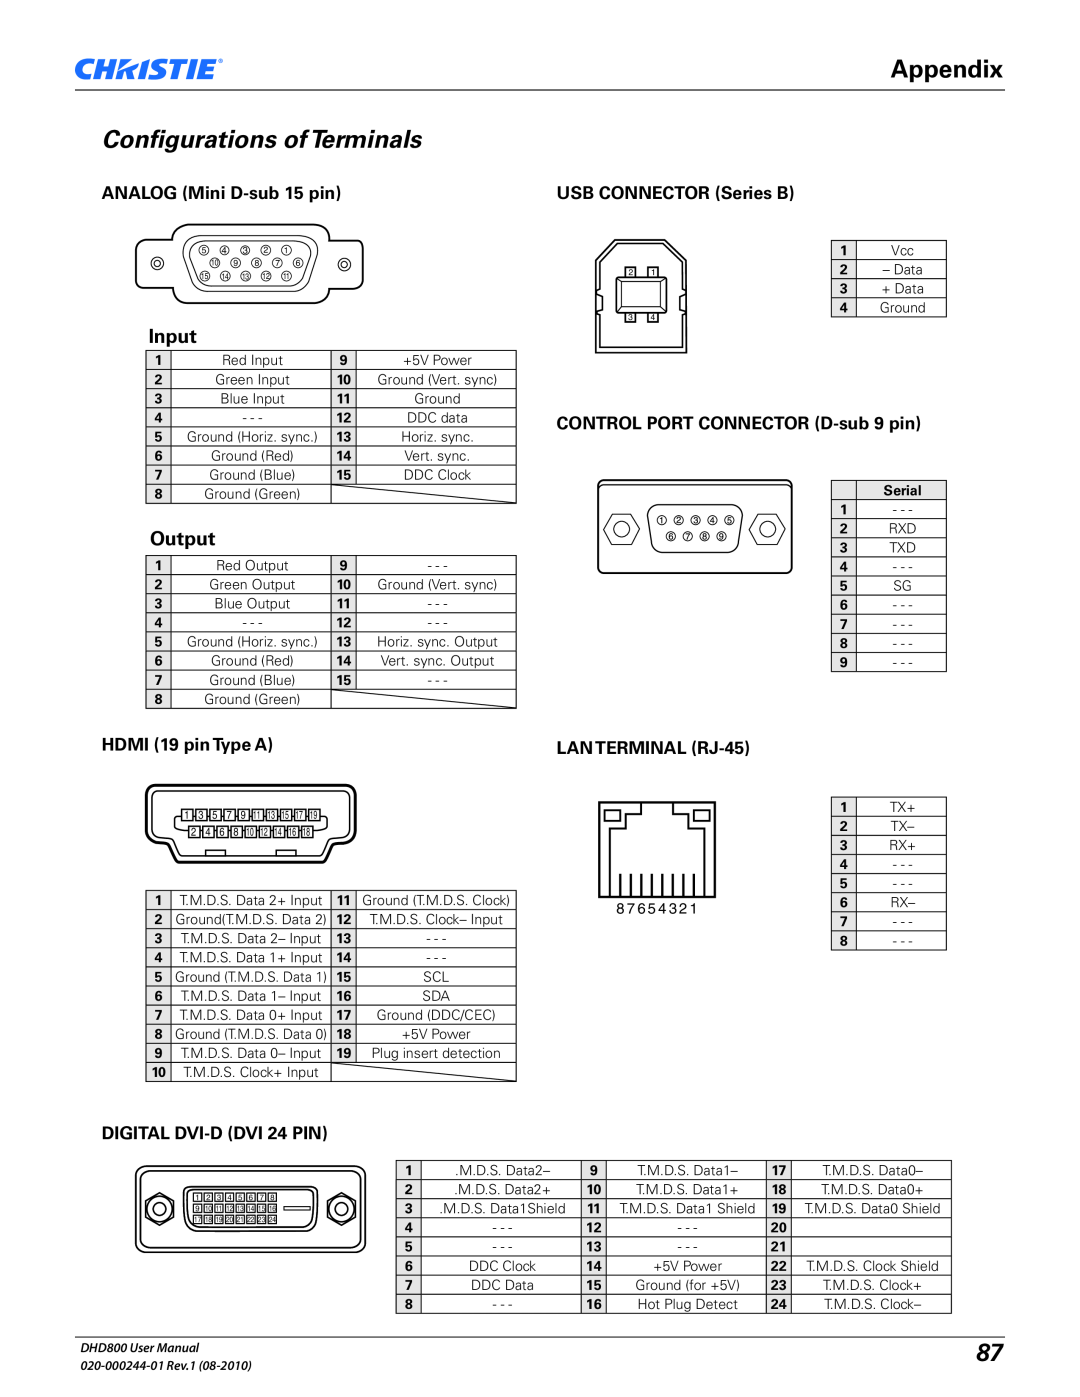 Christie Digital Systems DHD800 user manual Configurations of Terminals, Appendix, Input, Output 